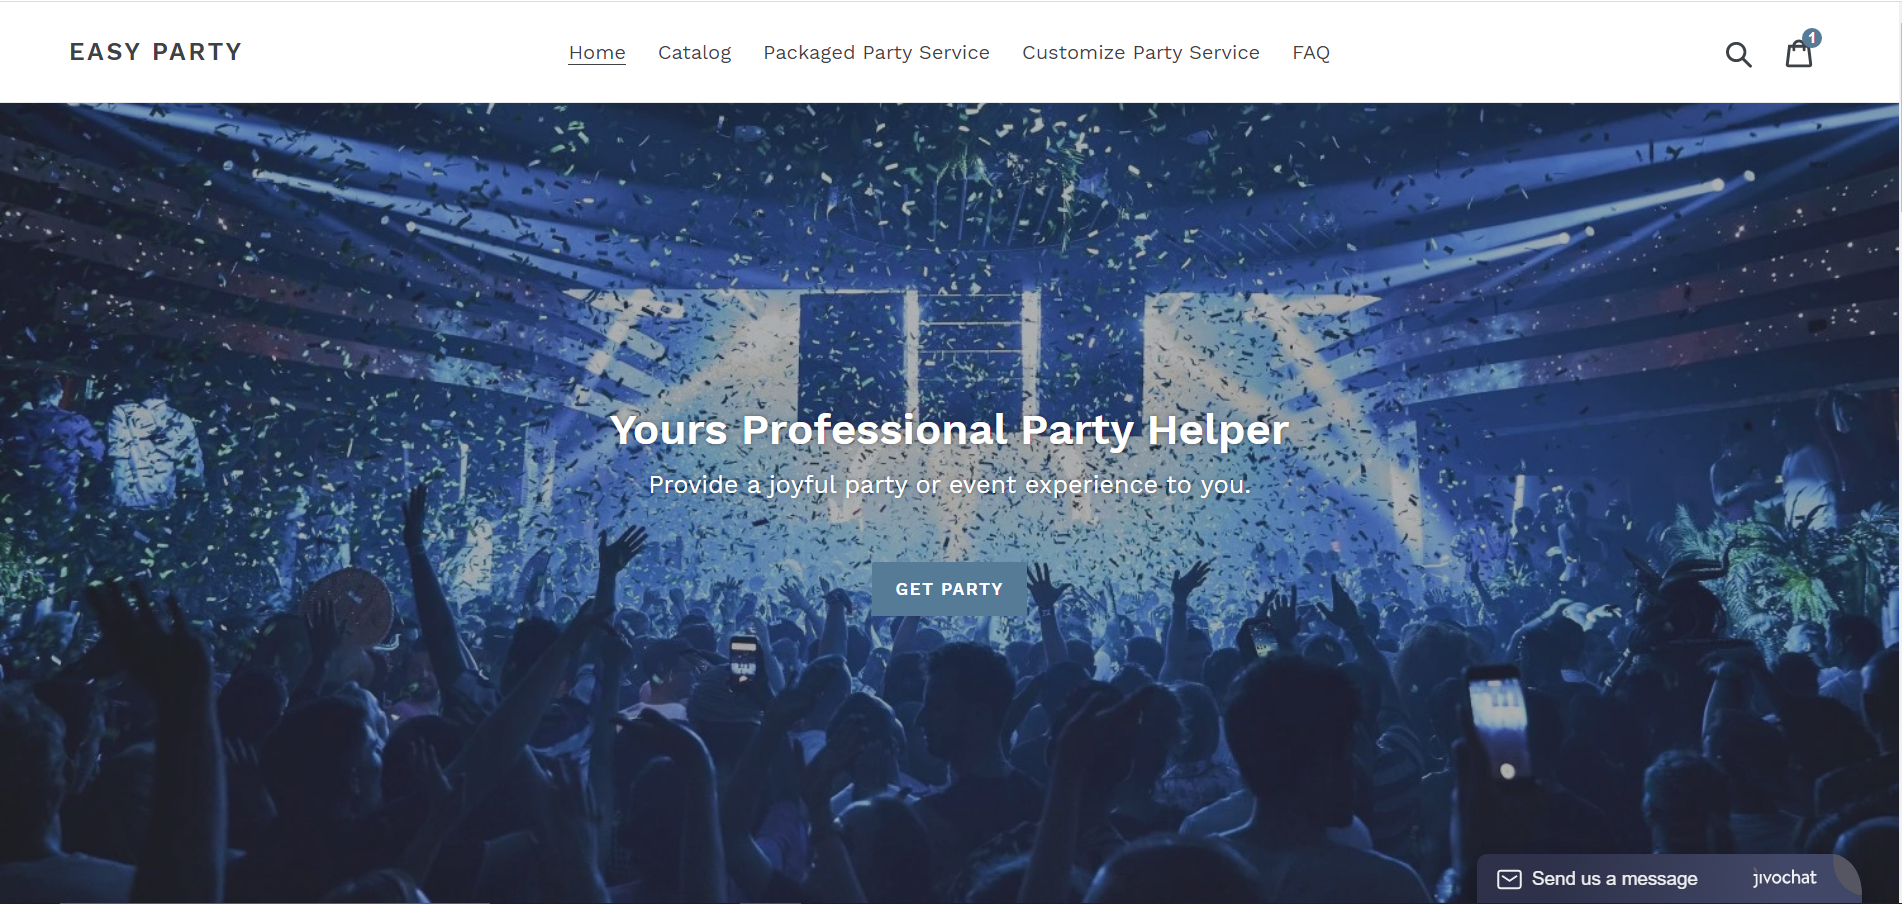 Easy Party Home page